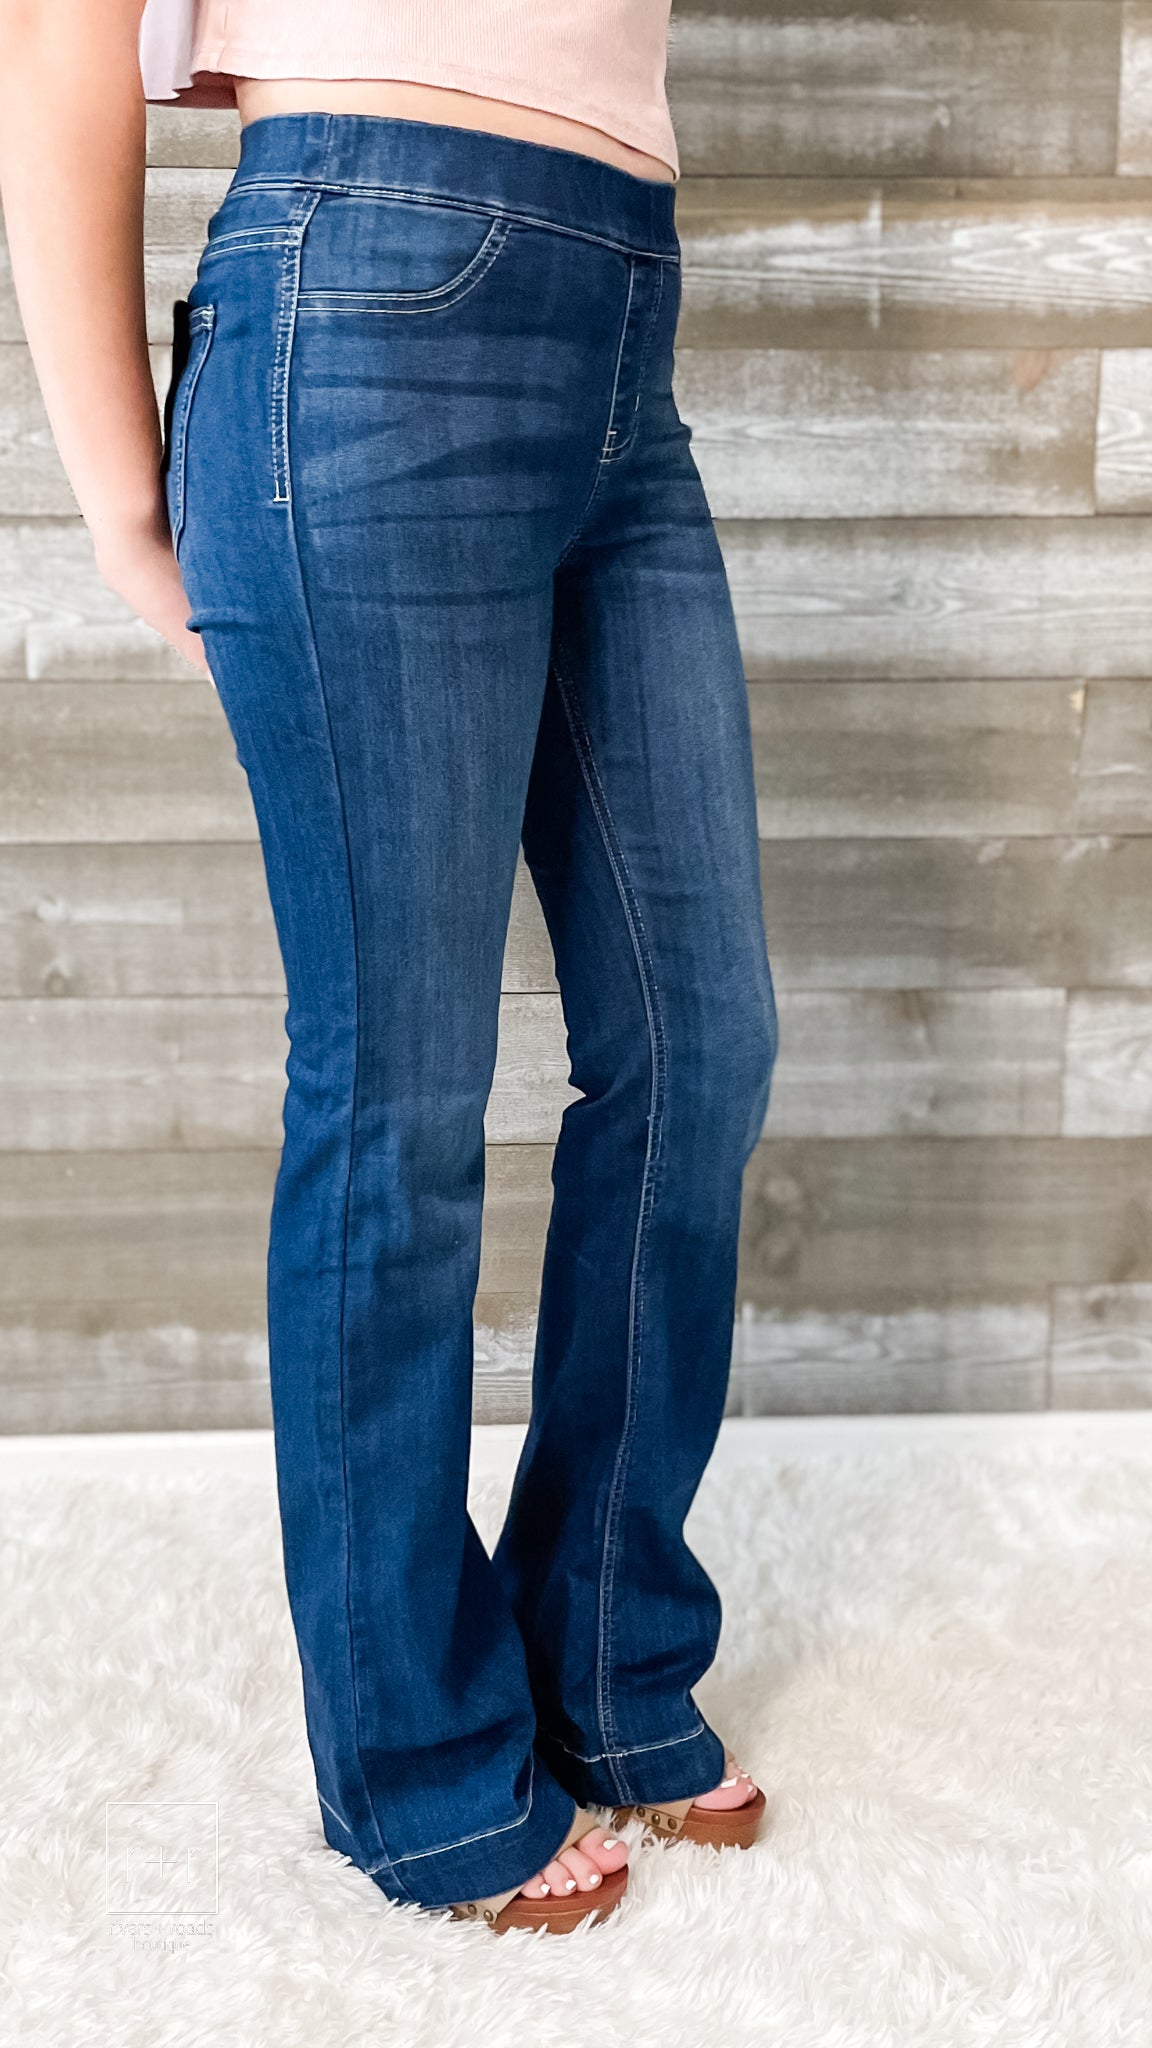 cello jeans mid rise pull on flare jegging in dark wash AB35324DK